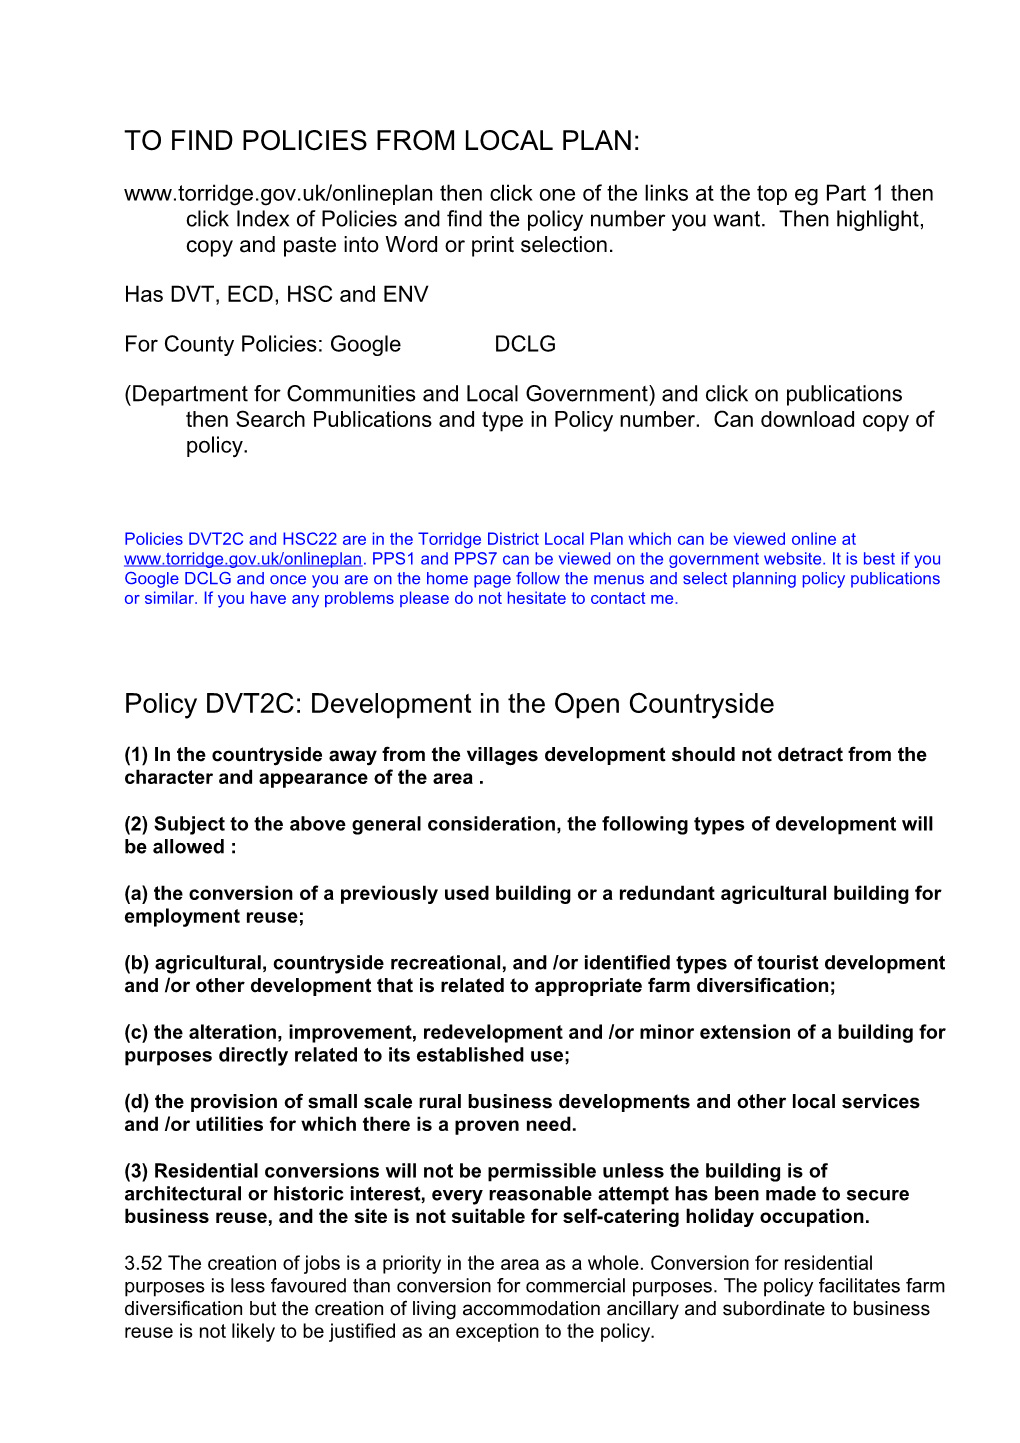 Policy DVT2C: Development in the Open Countryside